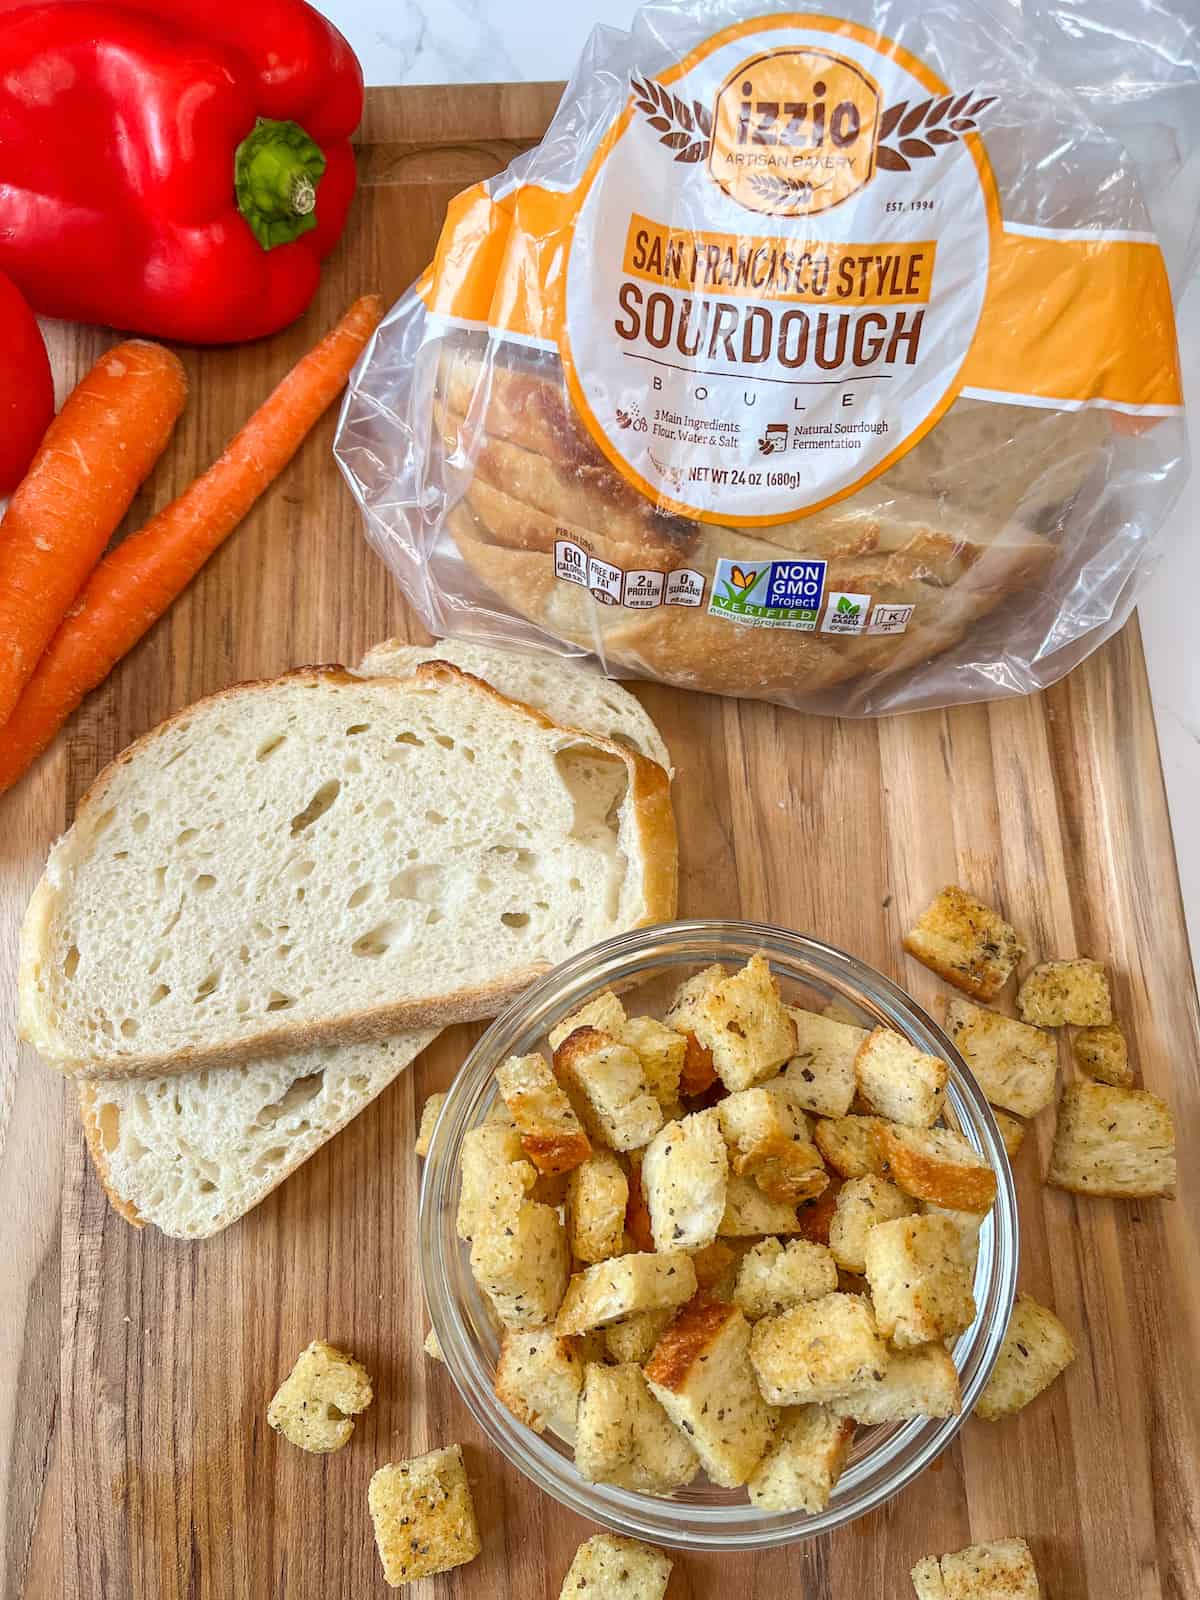 sourdough croutons in a small glass bowl with 2 slices of sourdough bread and a loaf of Izzio's sourdough bread in the background with a red bell pepper and 2 raw carrots